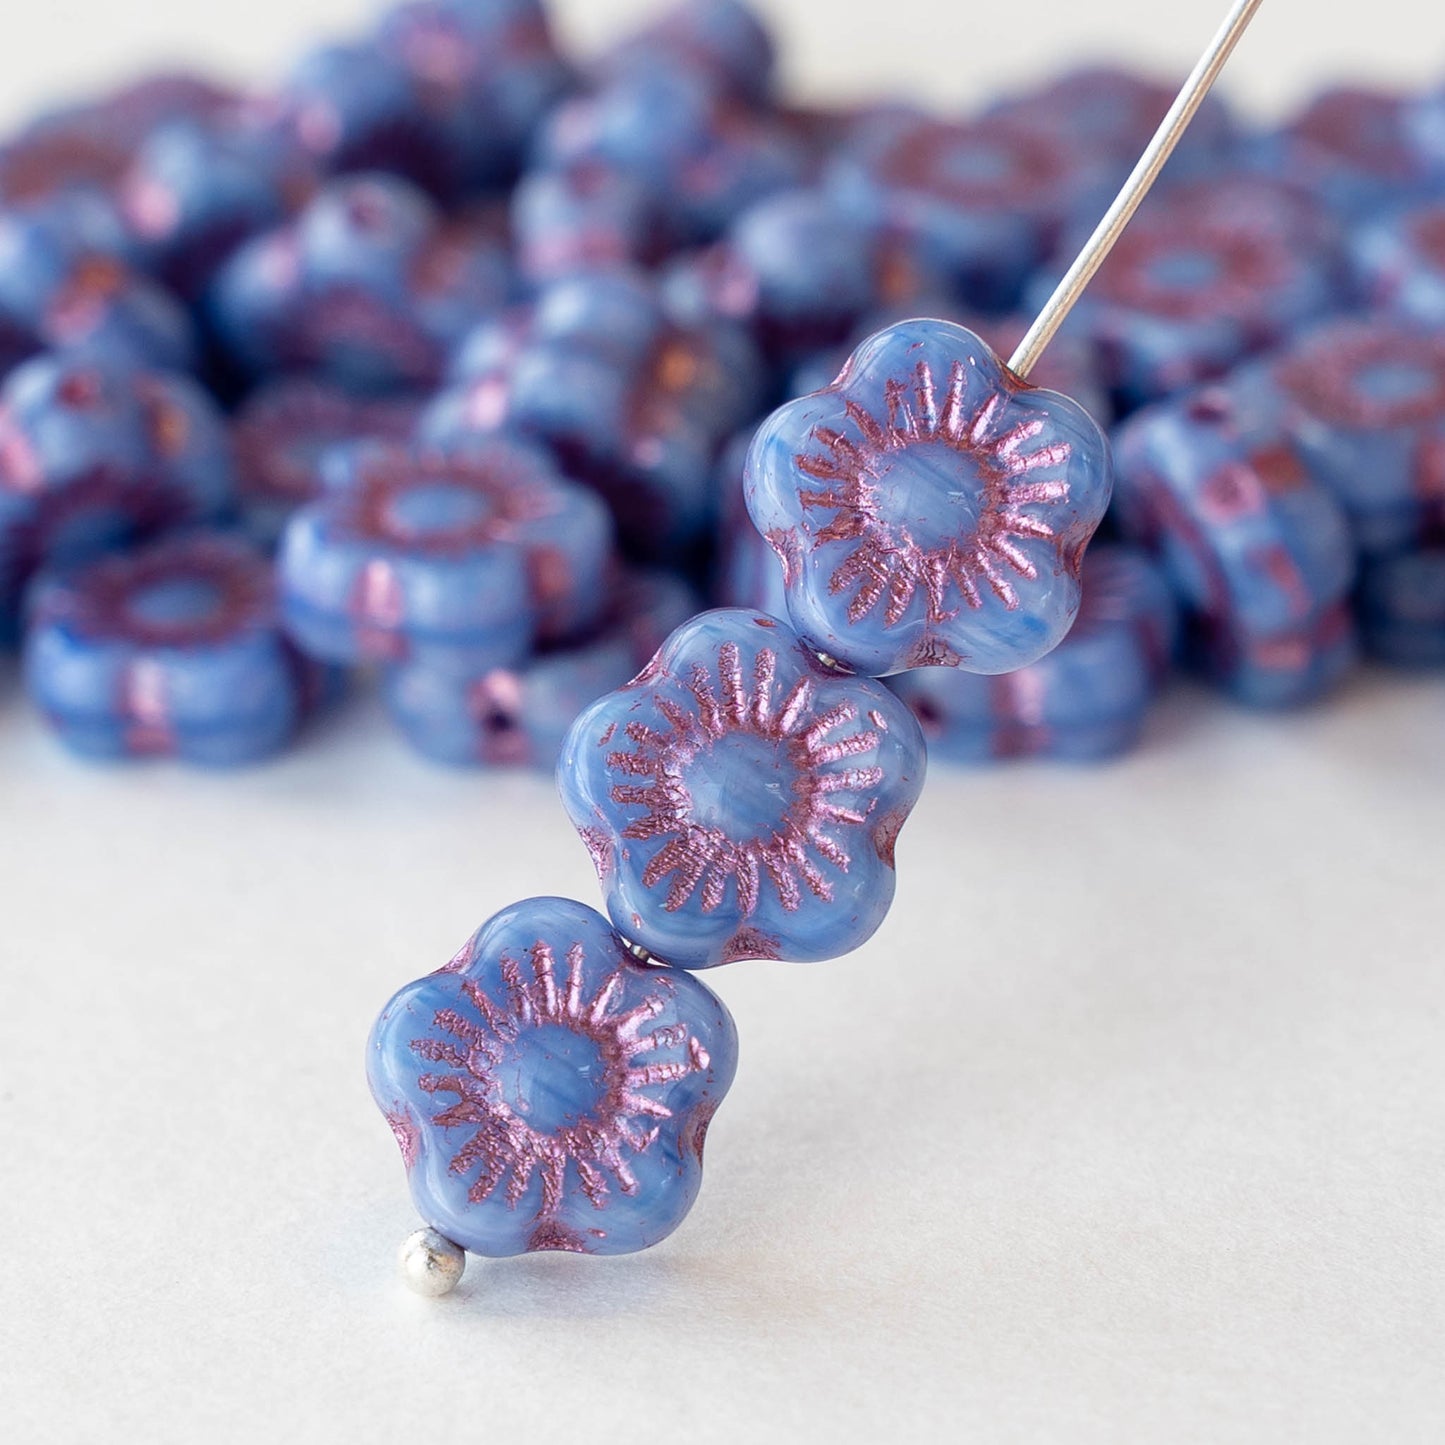 10mm Glass Flower Beads - Periwinkle with Pink Wash - 20 beads